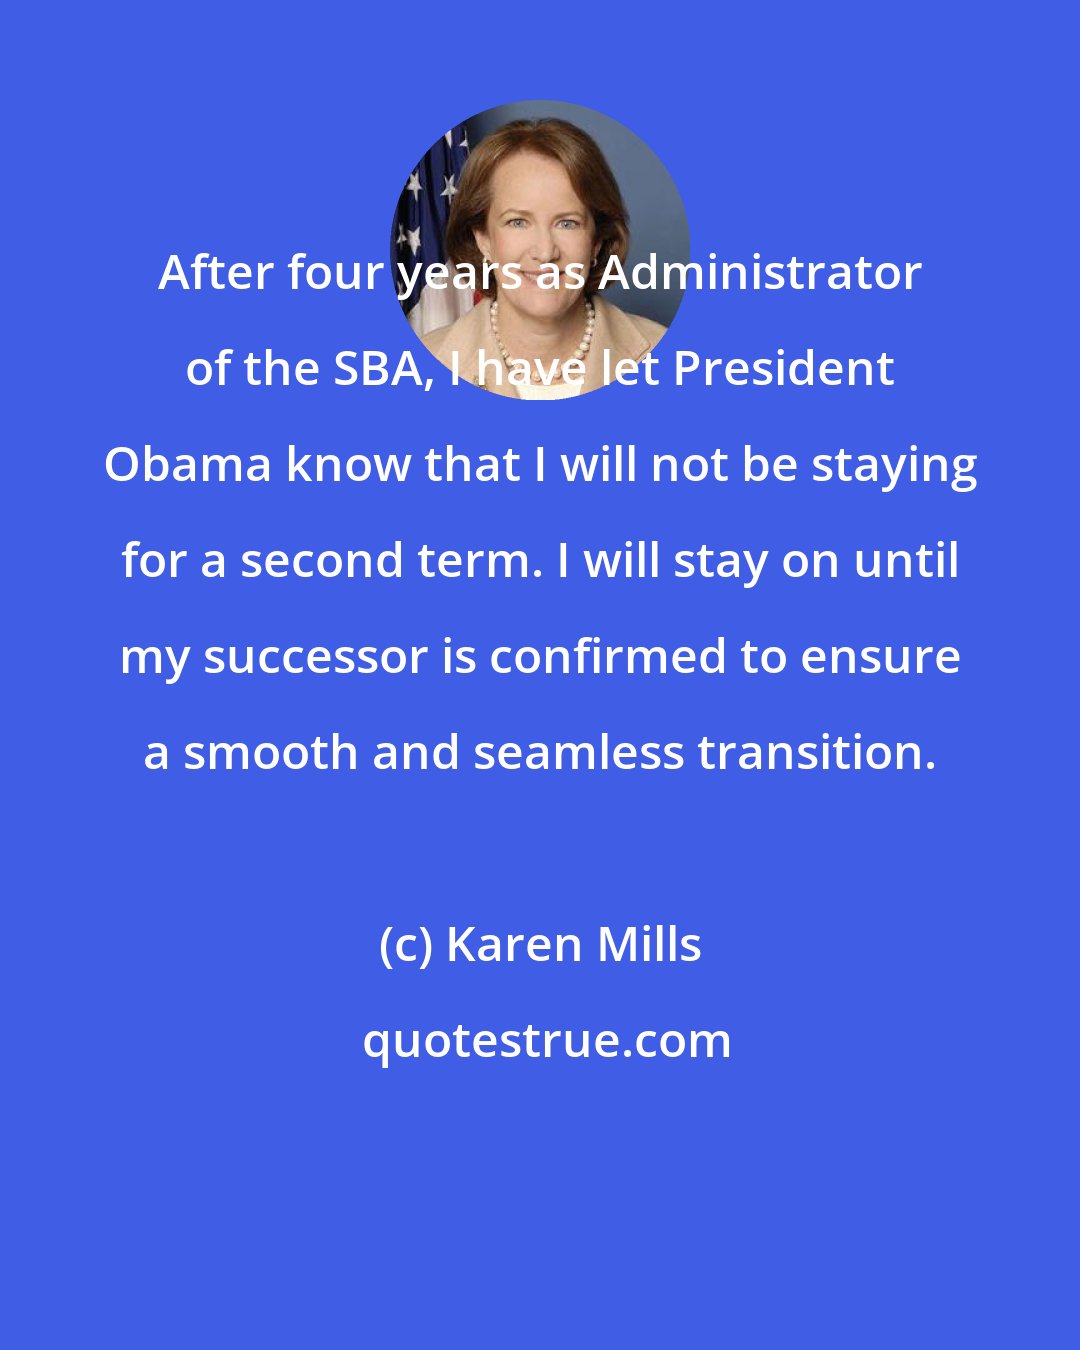 Karen Mills: After four years as Administrator of the SBA, I have let President Obama know that I will not be staying for a second term. I will stay on until my successor is confirmed to ensure a smooth and seamless transition.